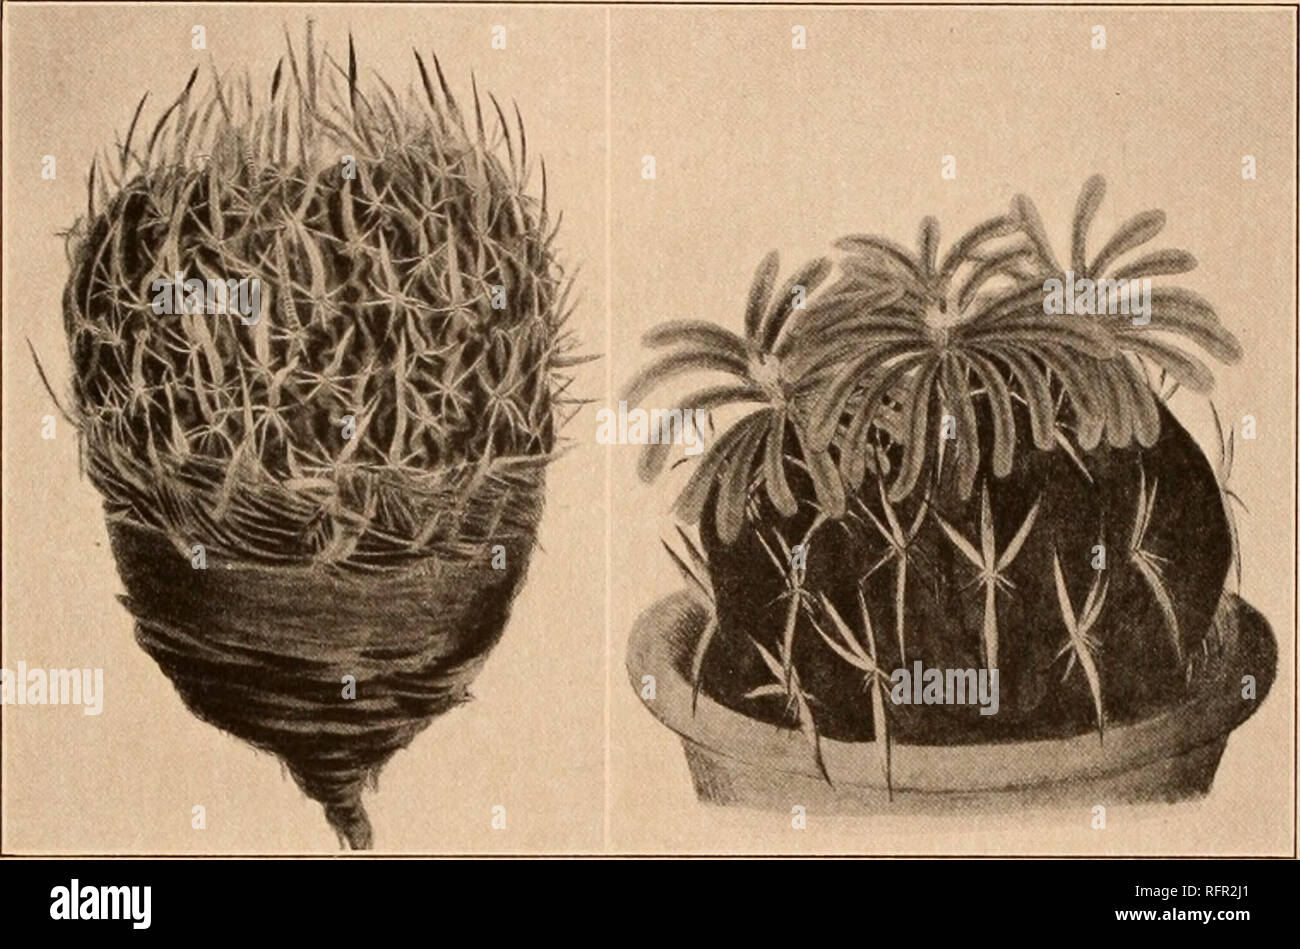 . Carnegie Institution of Washington publication. ECHINOFOSSULOCACTUS. II9 Type locality: Mexico. Distribution: Mexico. Pfeiffer in 1837 attempted to identify Echinocactus obvallatus with certain plants then in the Schelhase collection, but later when he figured his plant he questioned this identifi- cation, although he did not rename it. Dietrich, however, in 1839, named the Echinocactus obvallatus Pfeiffer in part, as above. Echinocactus lancifer was used by Reichenbach (in Terscheck, Suppl. Cact. 2), but whether properly described or not we do not know. The name was, however, formally publi Stock Photo